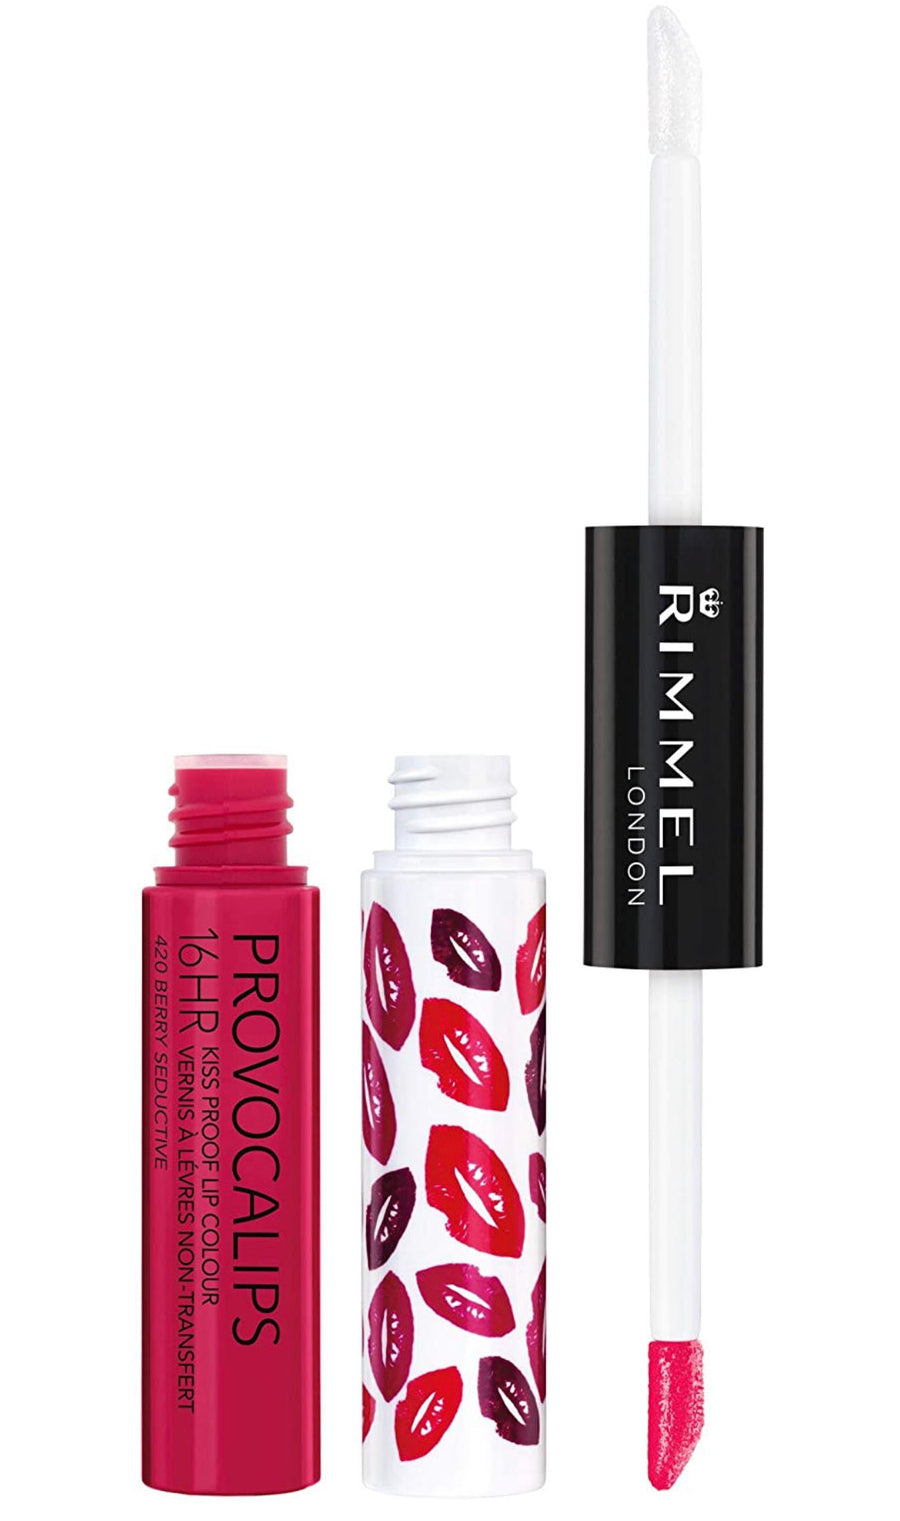 Rimmel Provocalips 16 Hour Lip Color Duo